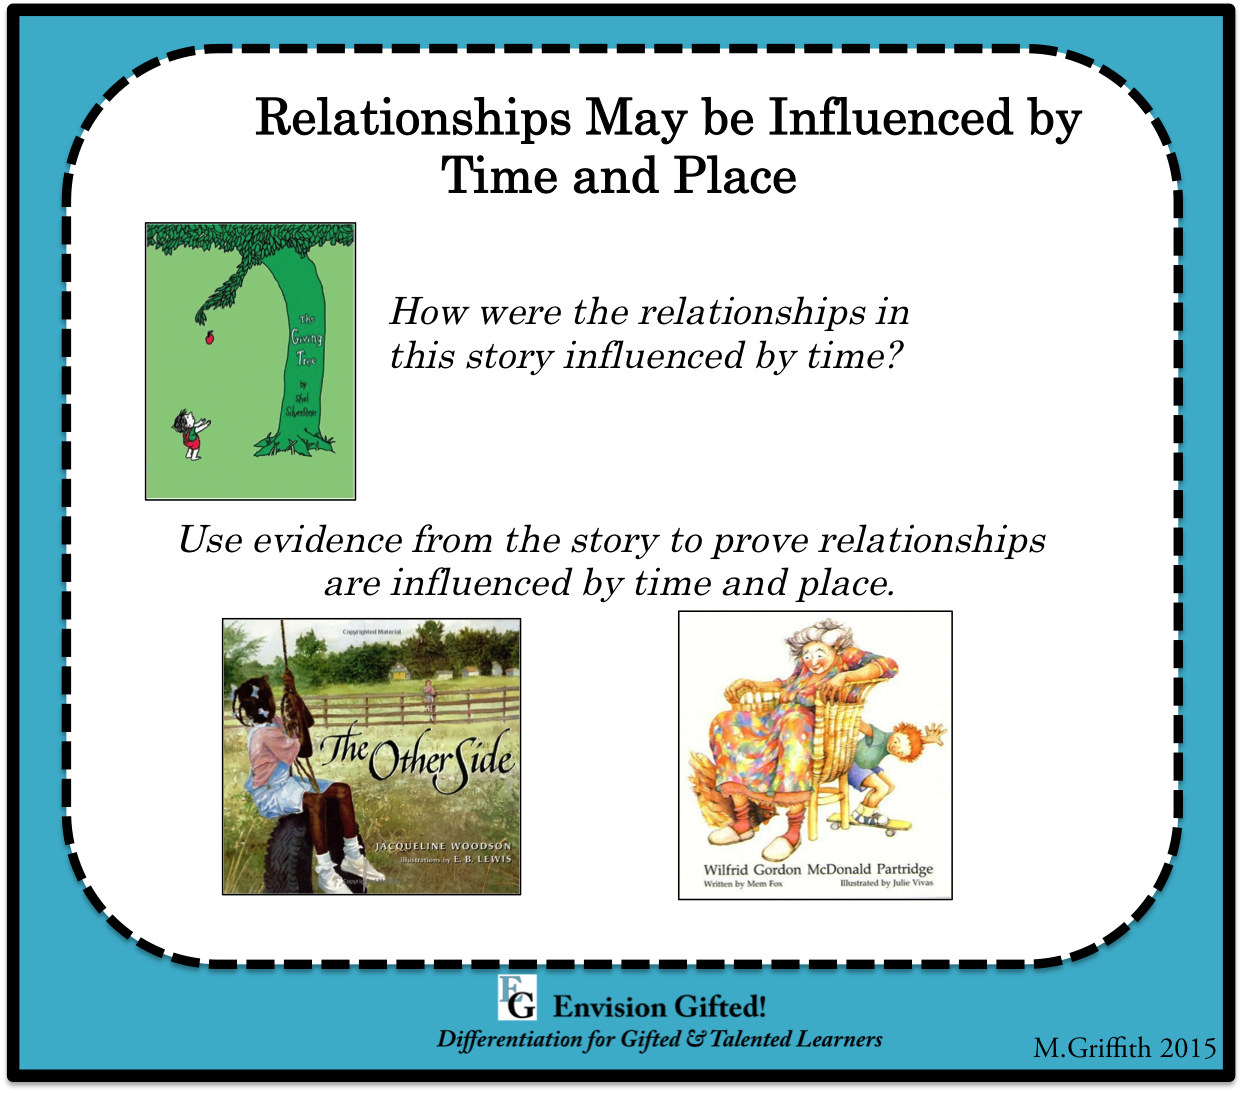 Envision Gifted. Universal Theme- Relationships Influenced by Time and Place